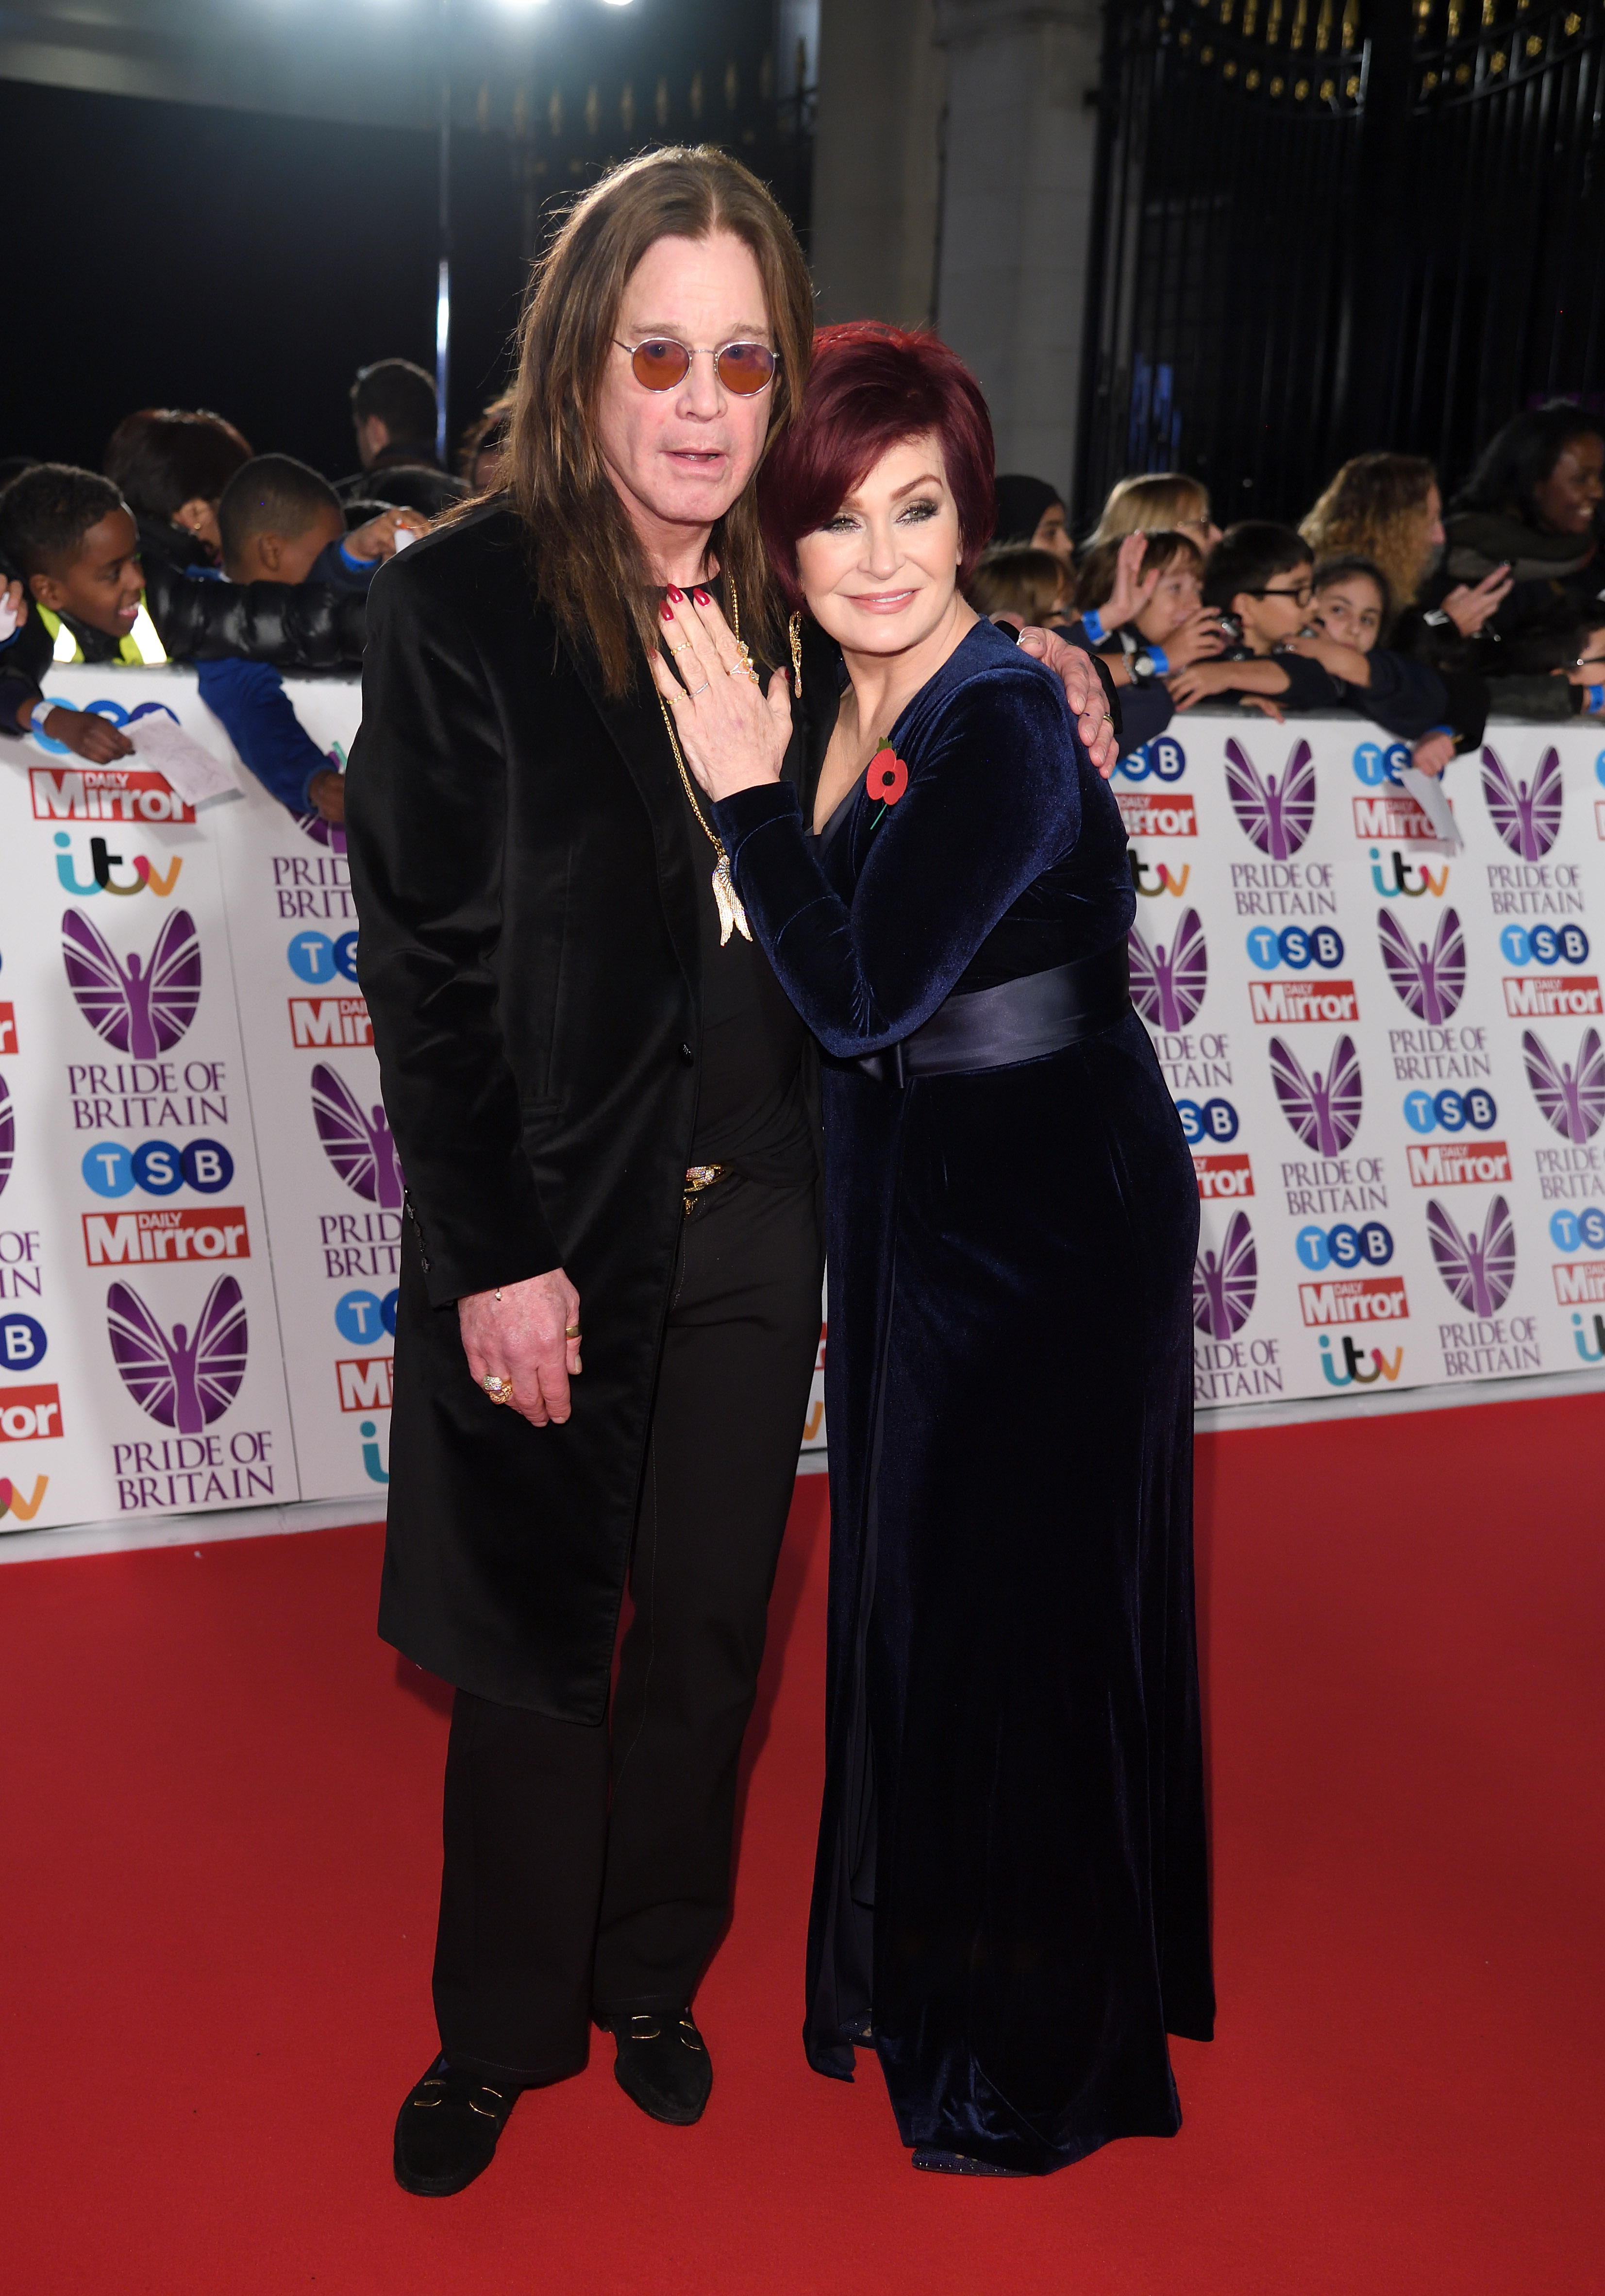 Ozzy Osbourne and Sharon Osbourne attend the Pride of Britain Awards at the Grosvenor House on October 30, 2017 in London, England. | Source: Getty Images